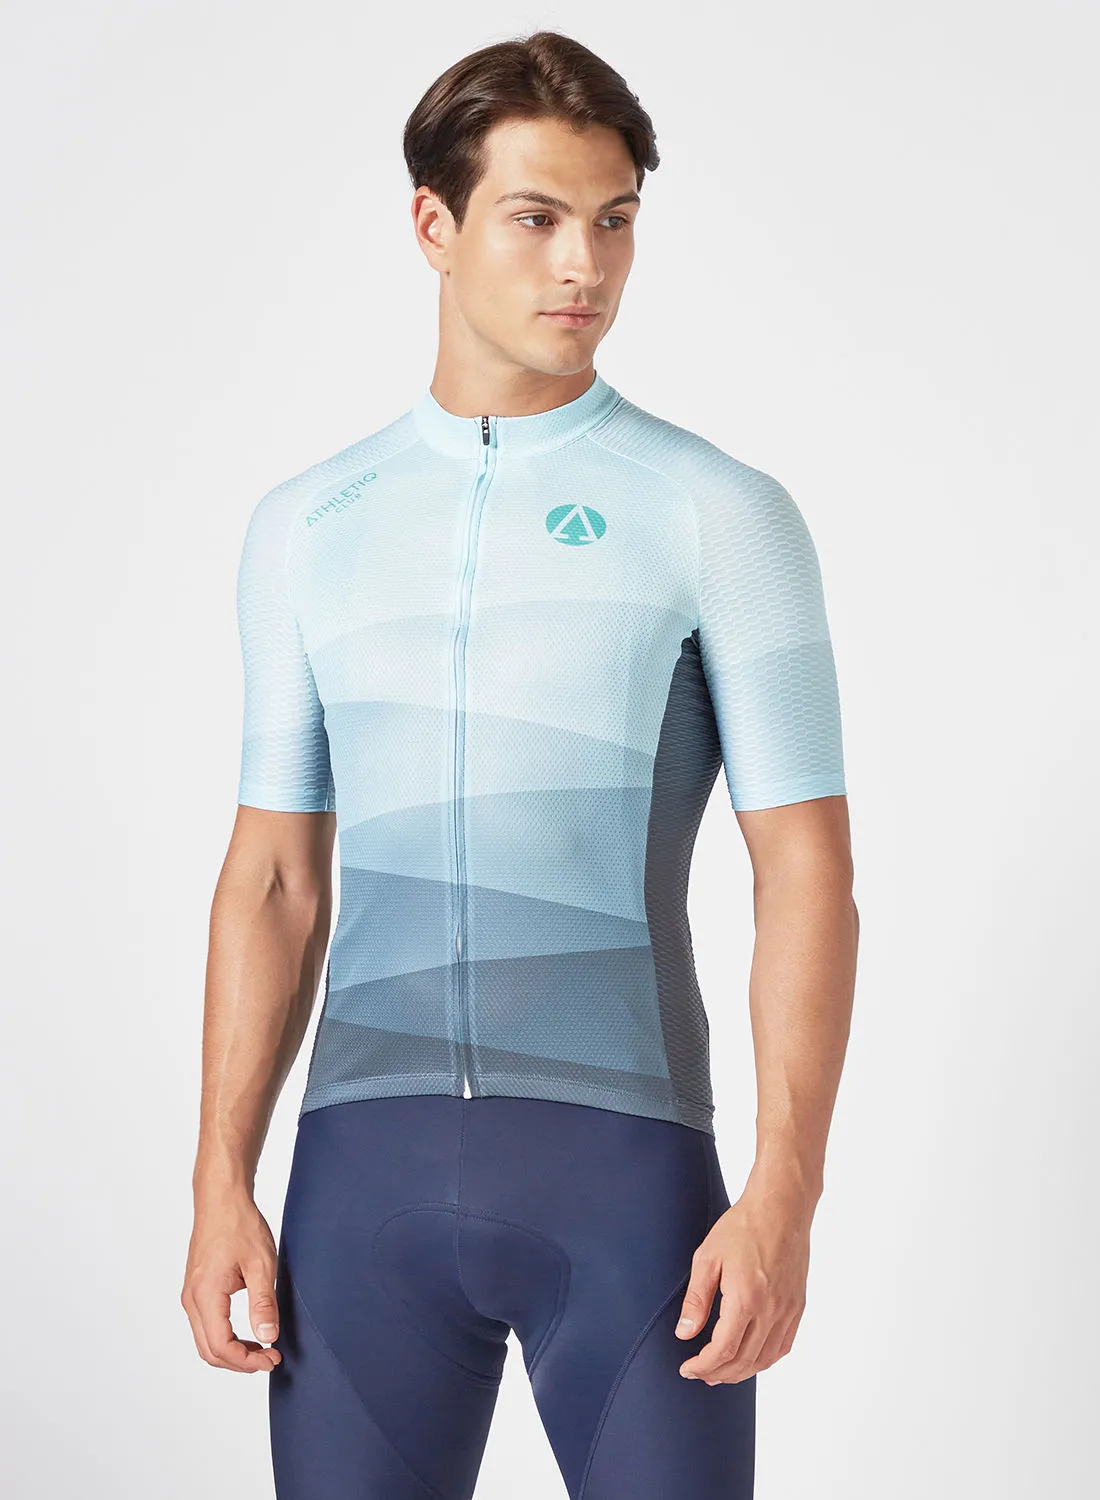 Athletiq Club Mulhacen - Cycling Jersey Men - Inspired To Achieve